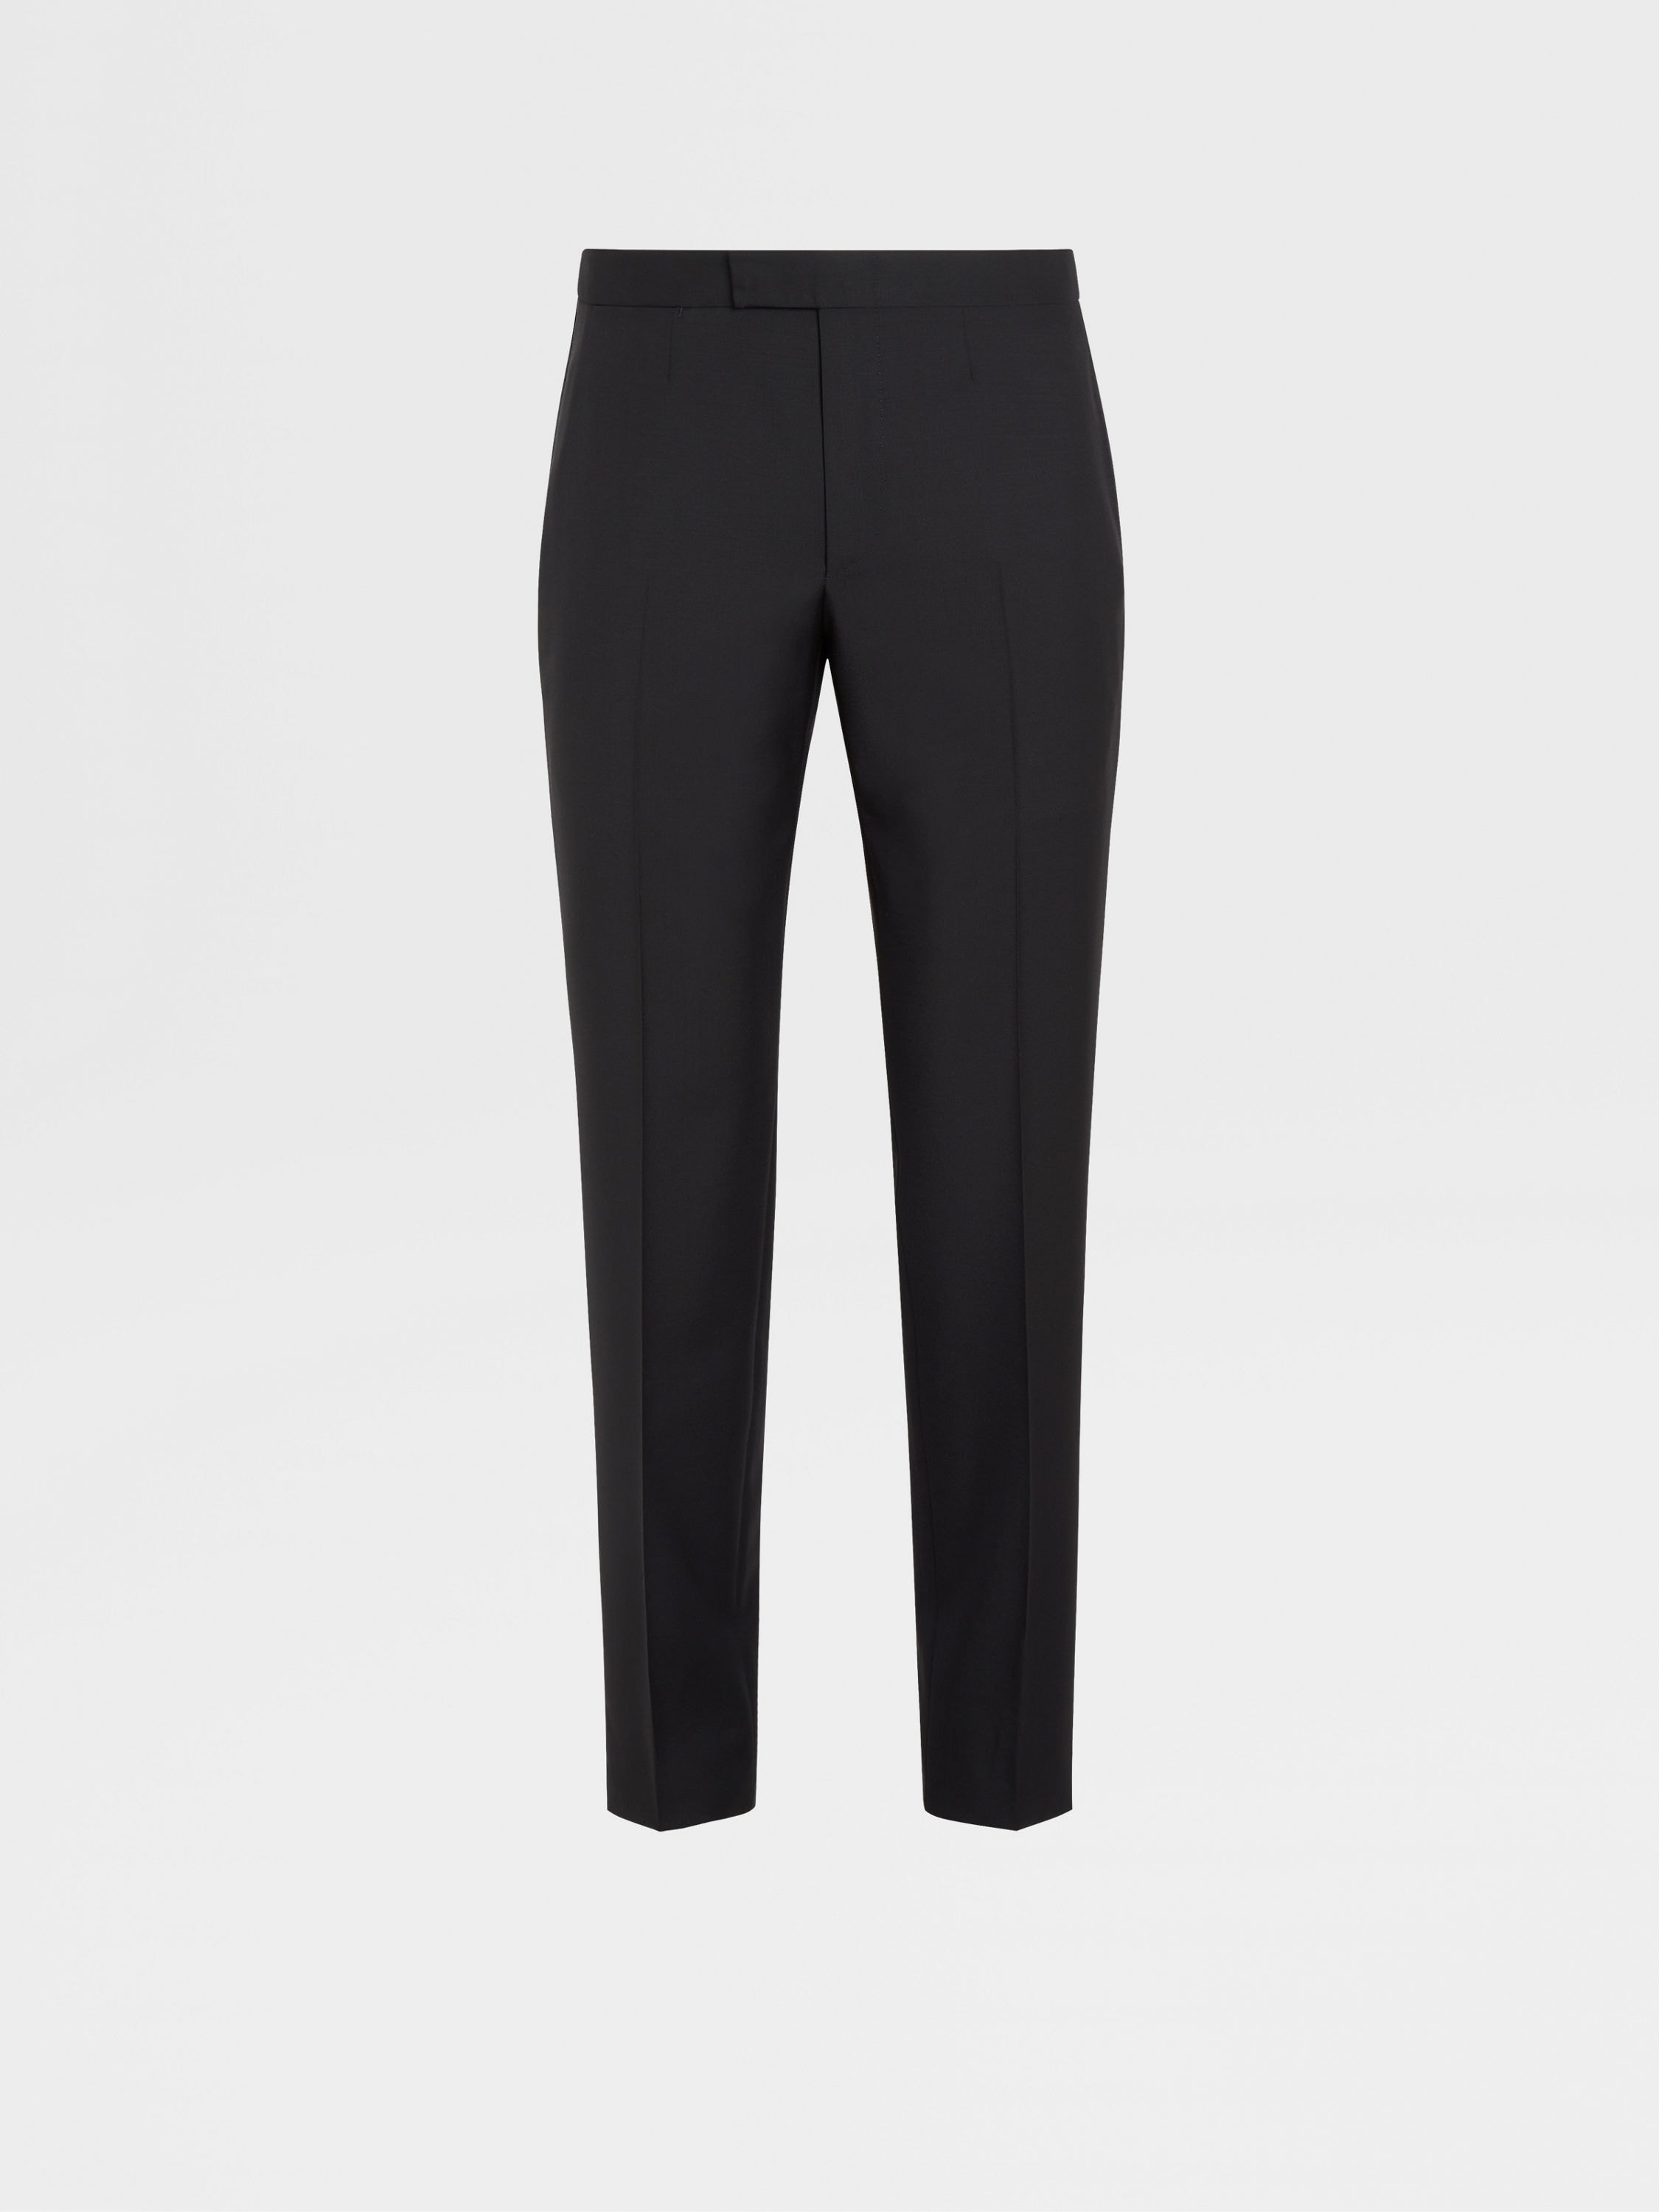 Black Wool Knit Trousers for Women and Men